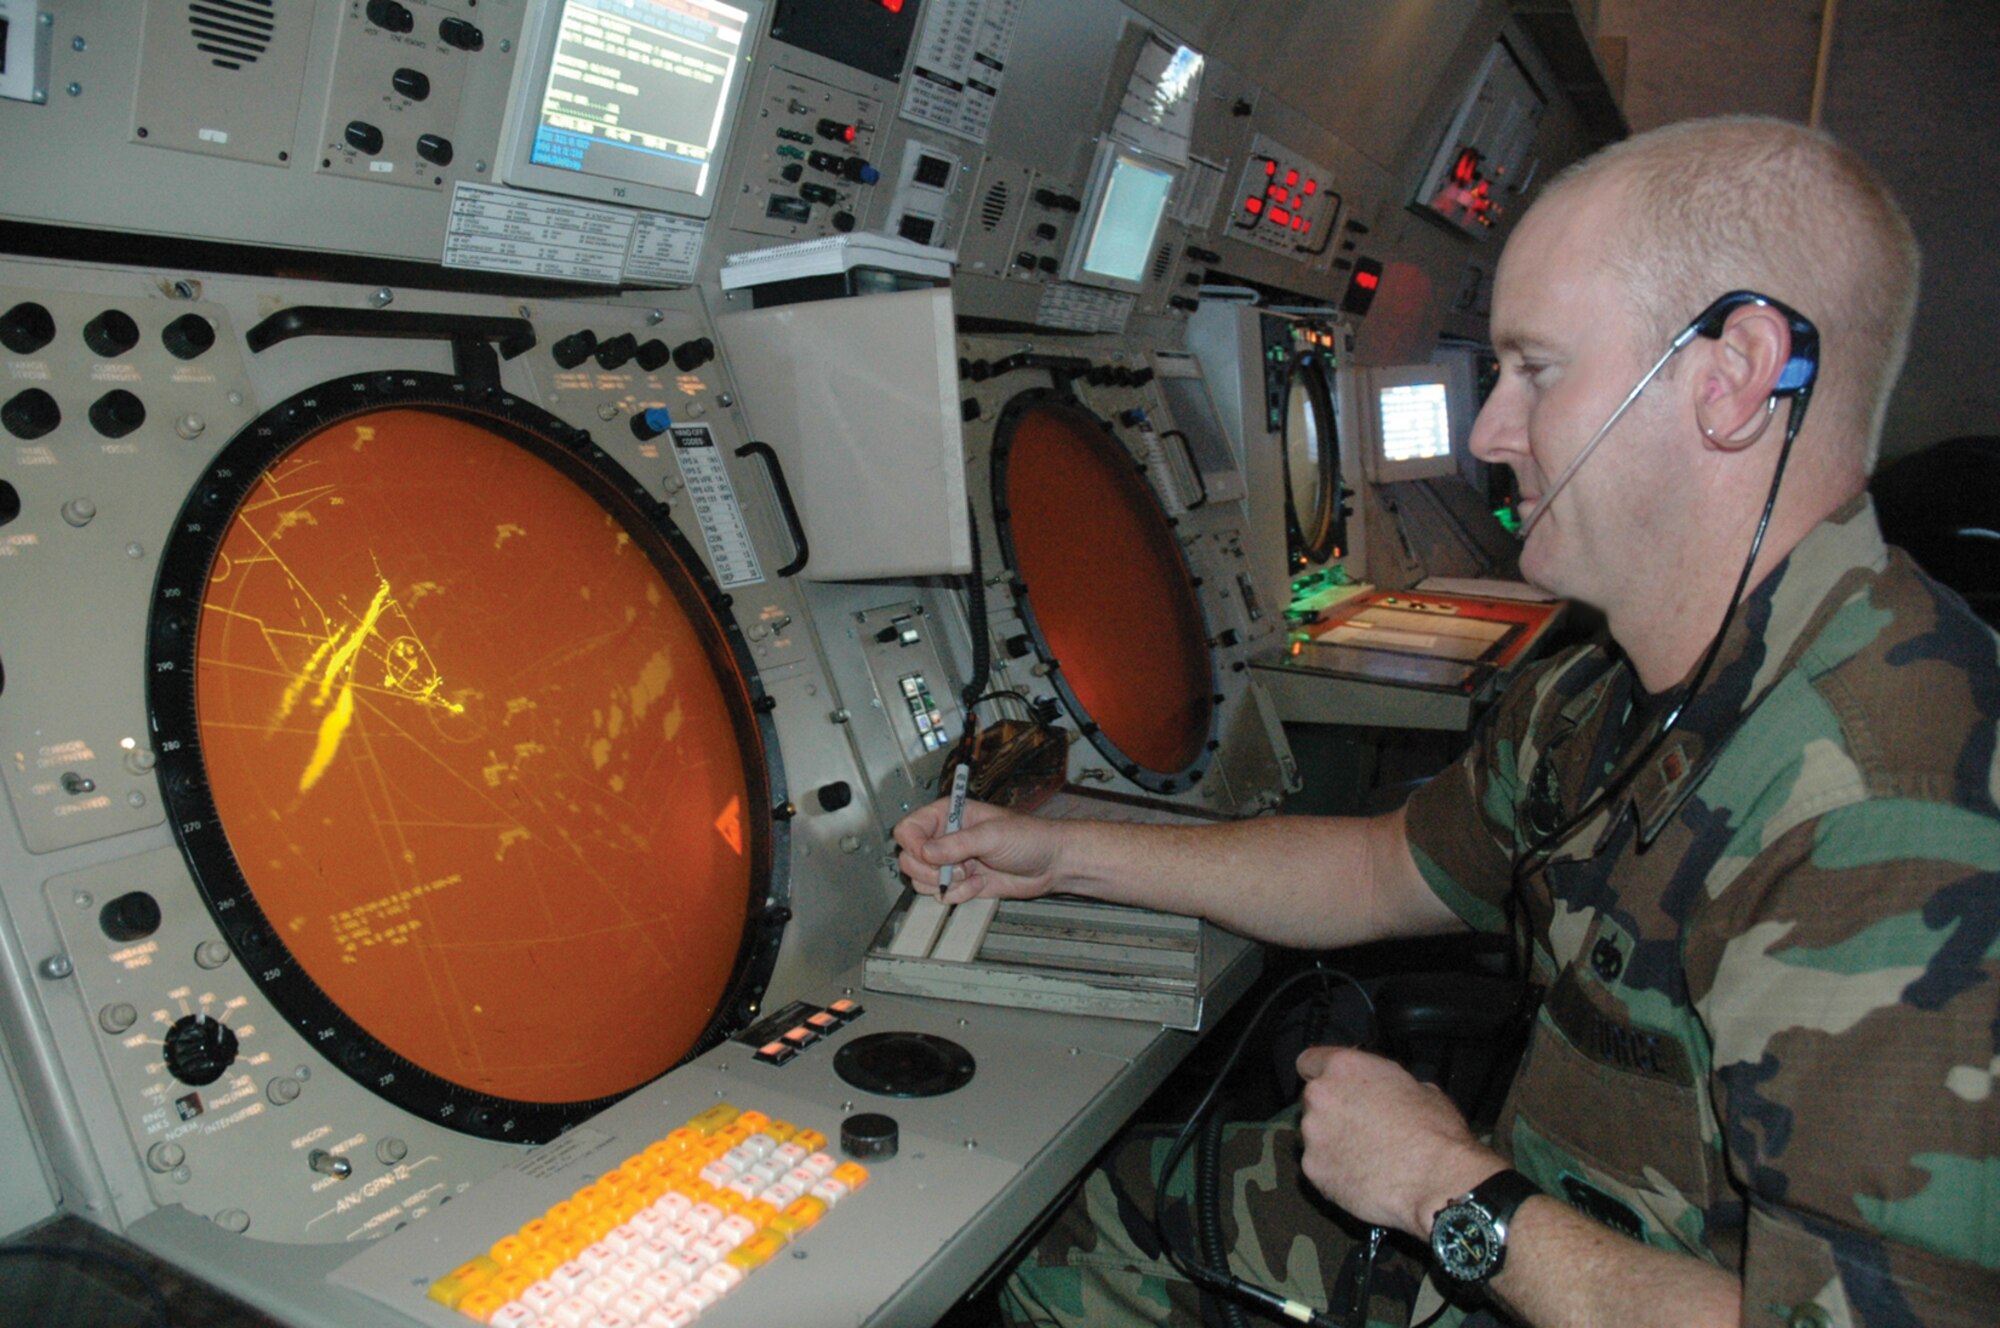 TYNDALL AFB, Fla. --  Second Lt. Charles Jesse, 325th Operations Support Squadron airfield operations officer, monitors live air traffic in the Radar Approach Control center here. (U.S. Air Force photo by 1st Lt. Amanda Ferrell)